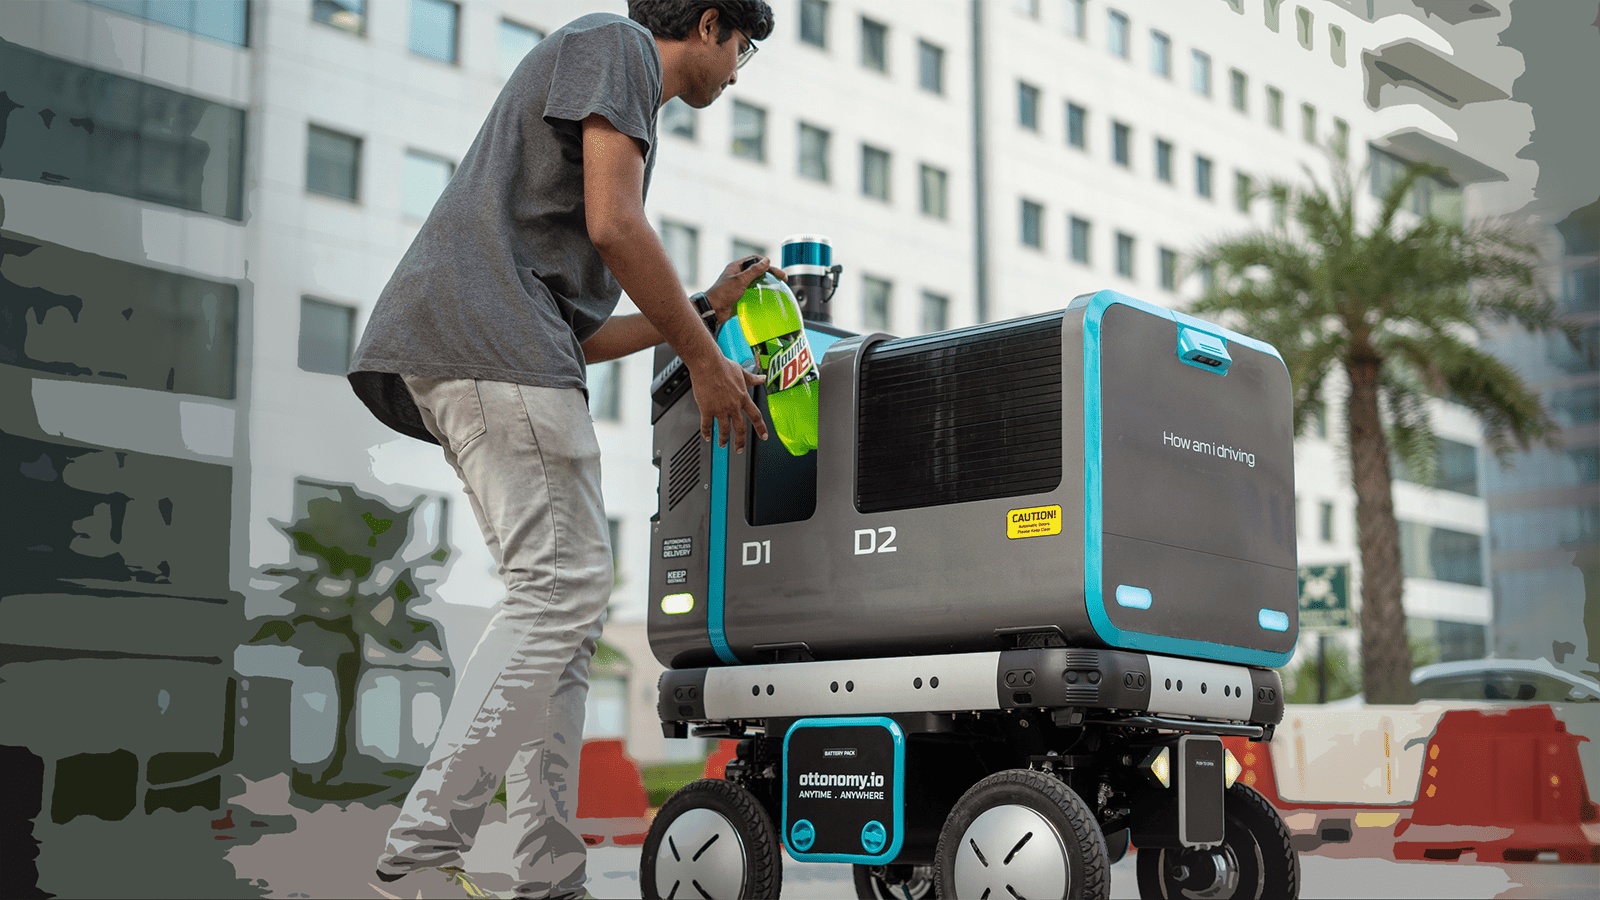 Leading autonomous robotics delivery startup Ottonomy.IO, launches Ottobot 2.0, the latest version of its fully autonomous robot: accessible, scalable and modular.